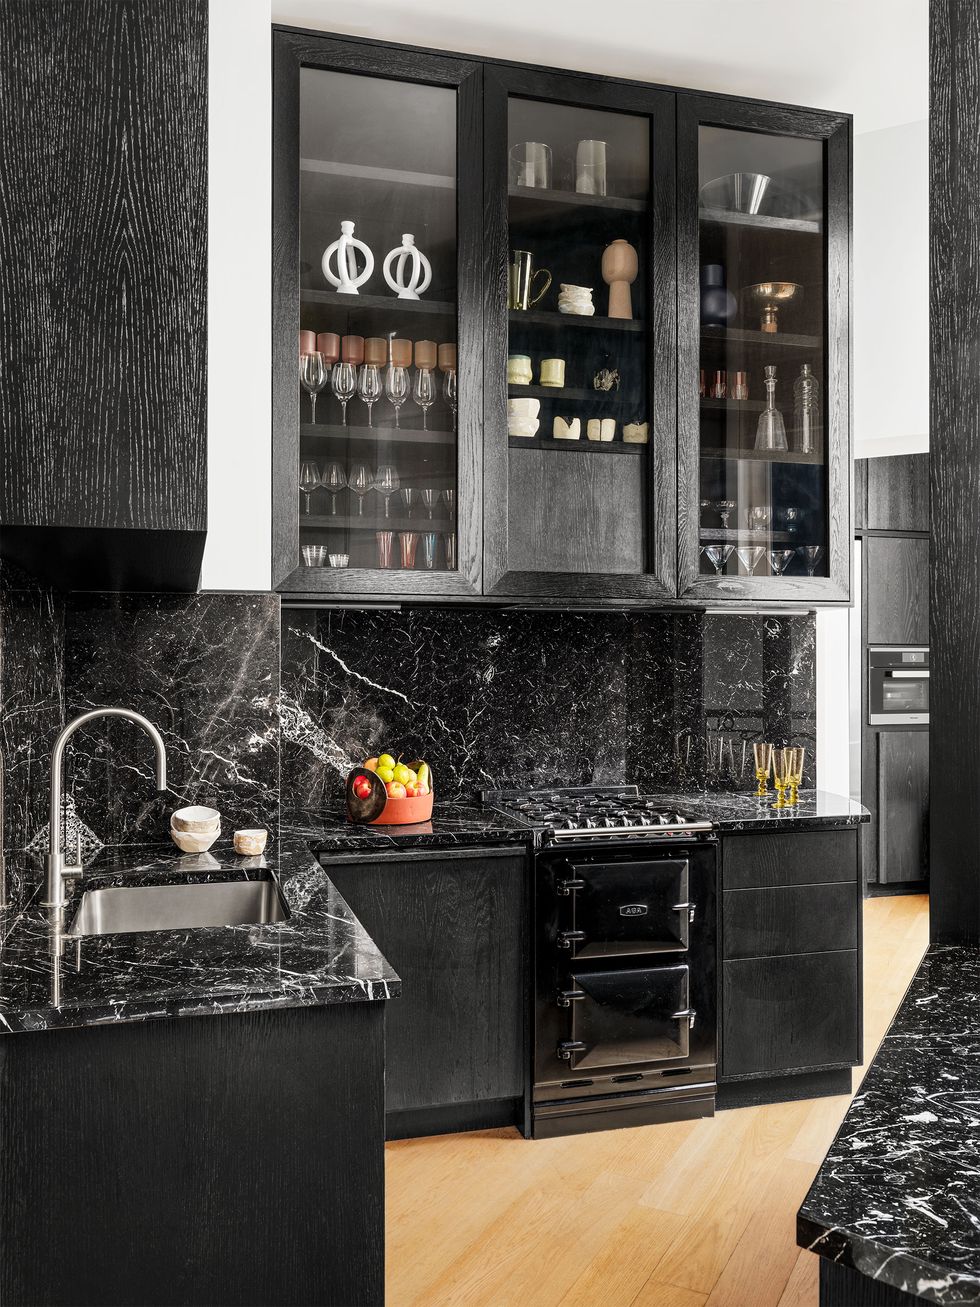 The kitchen has black lower cabinets clad in black marble with white veins and upper cabinets with glass fronts that reveal glassware and dishes, a stainless steel sink, and oak plank floors.